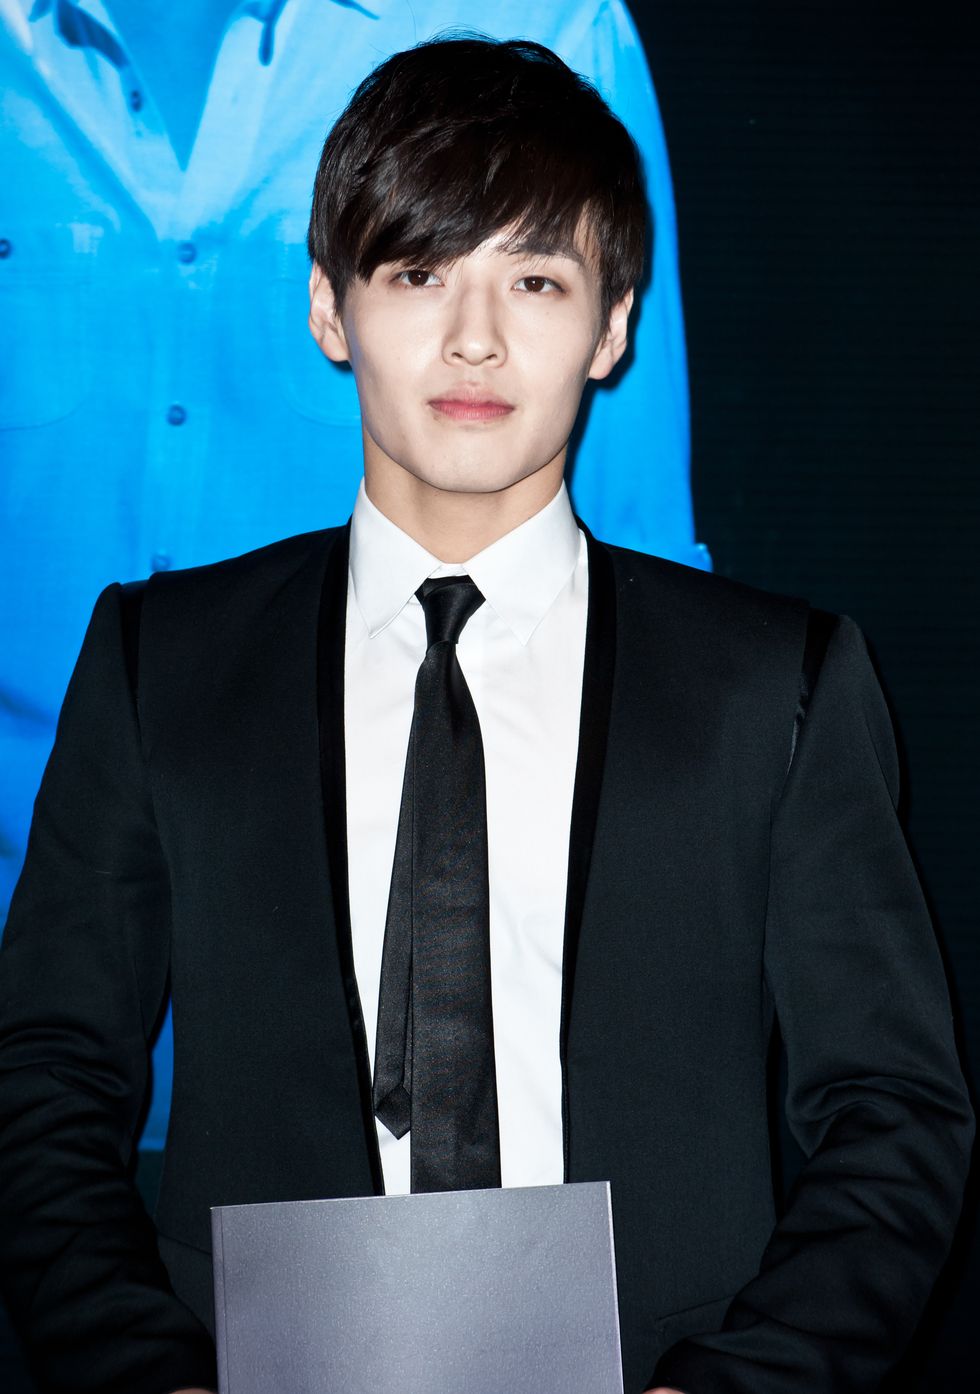 seoul, south korea   december 12  kang ha neul attends the musical ghost vip press screening at d cube arts center on december 12, 2013 in seoul, south korea  photo by choi soo youngmulti bits via getty images